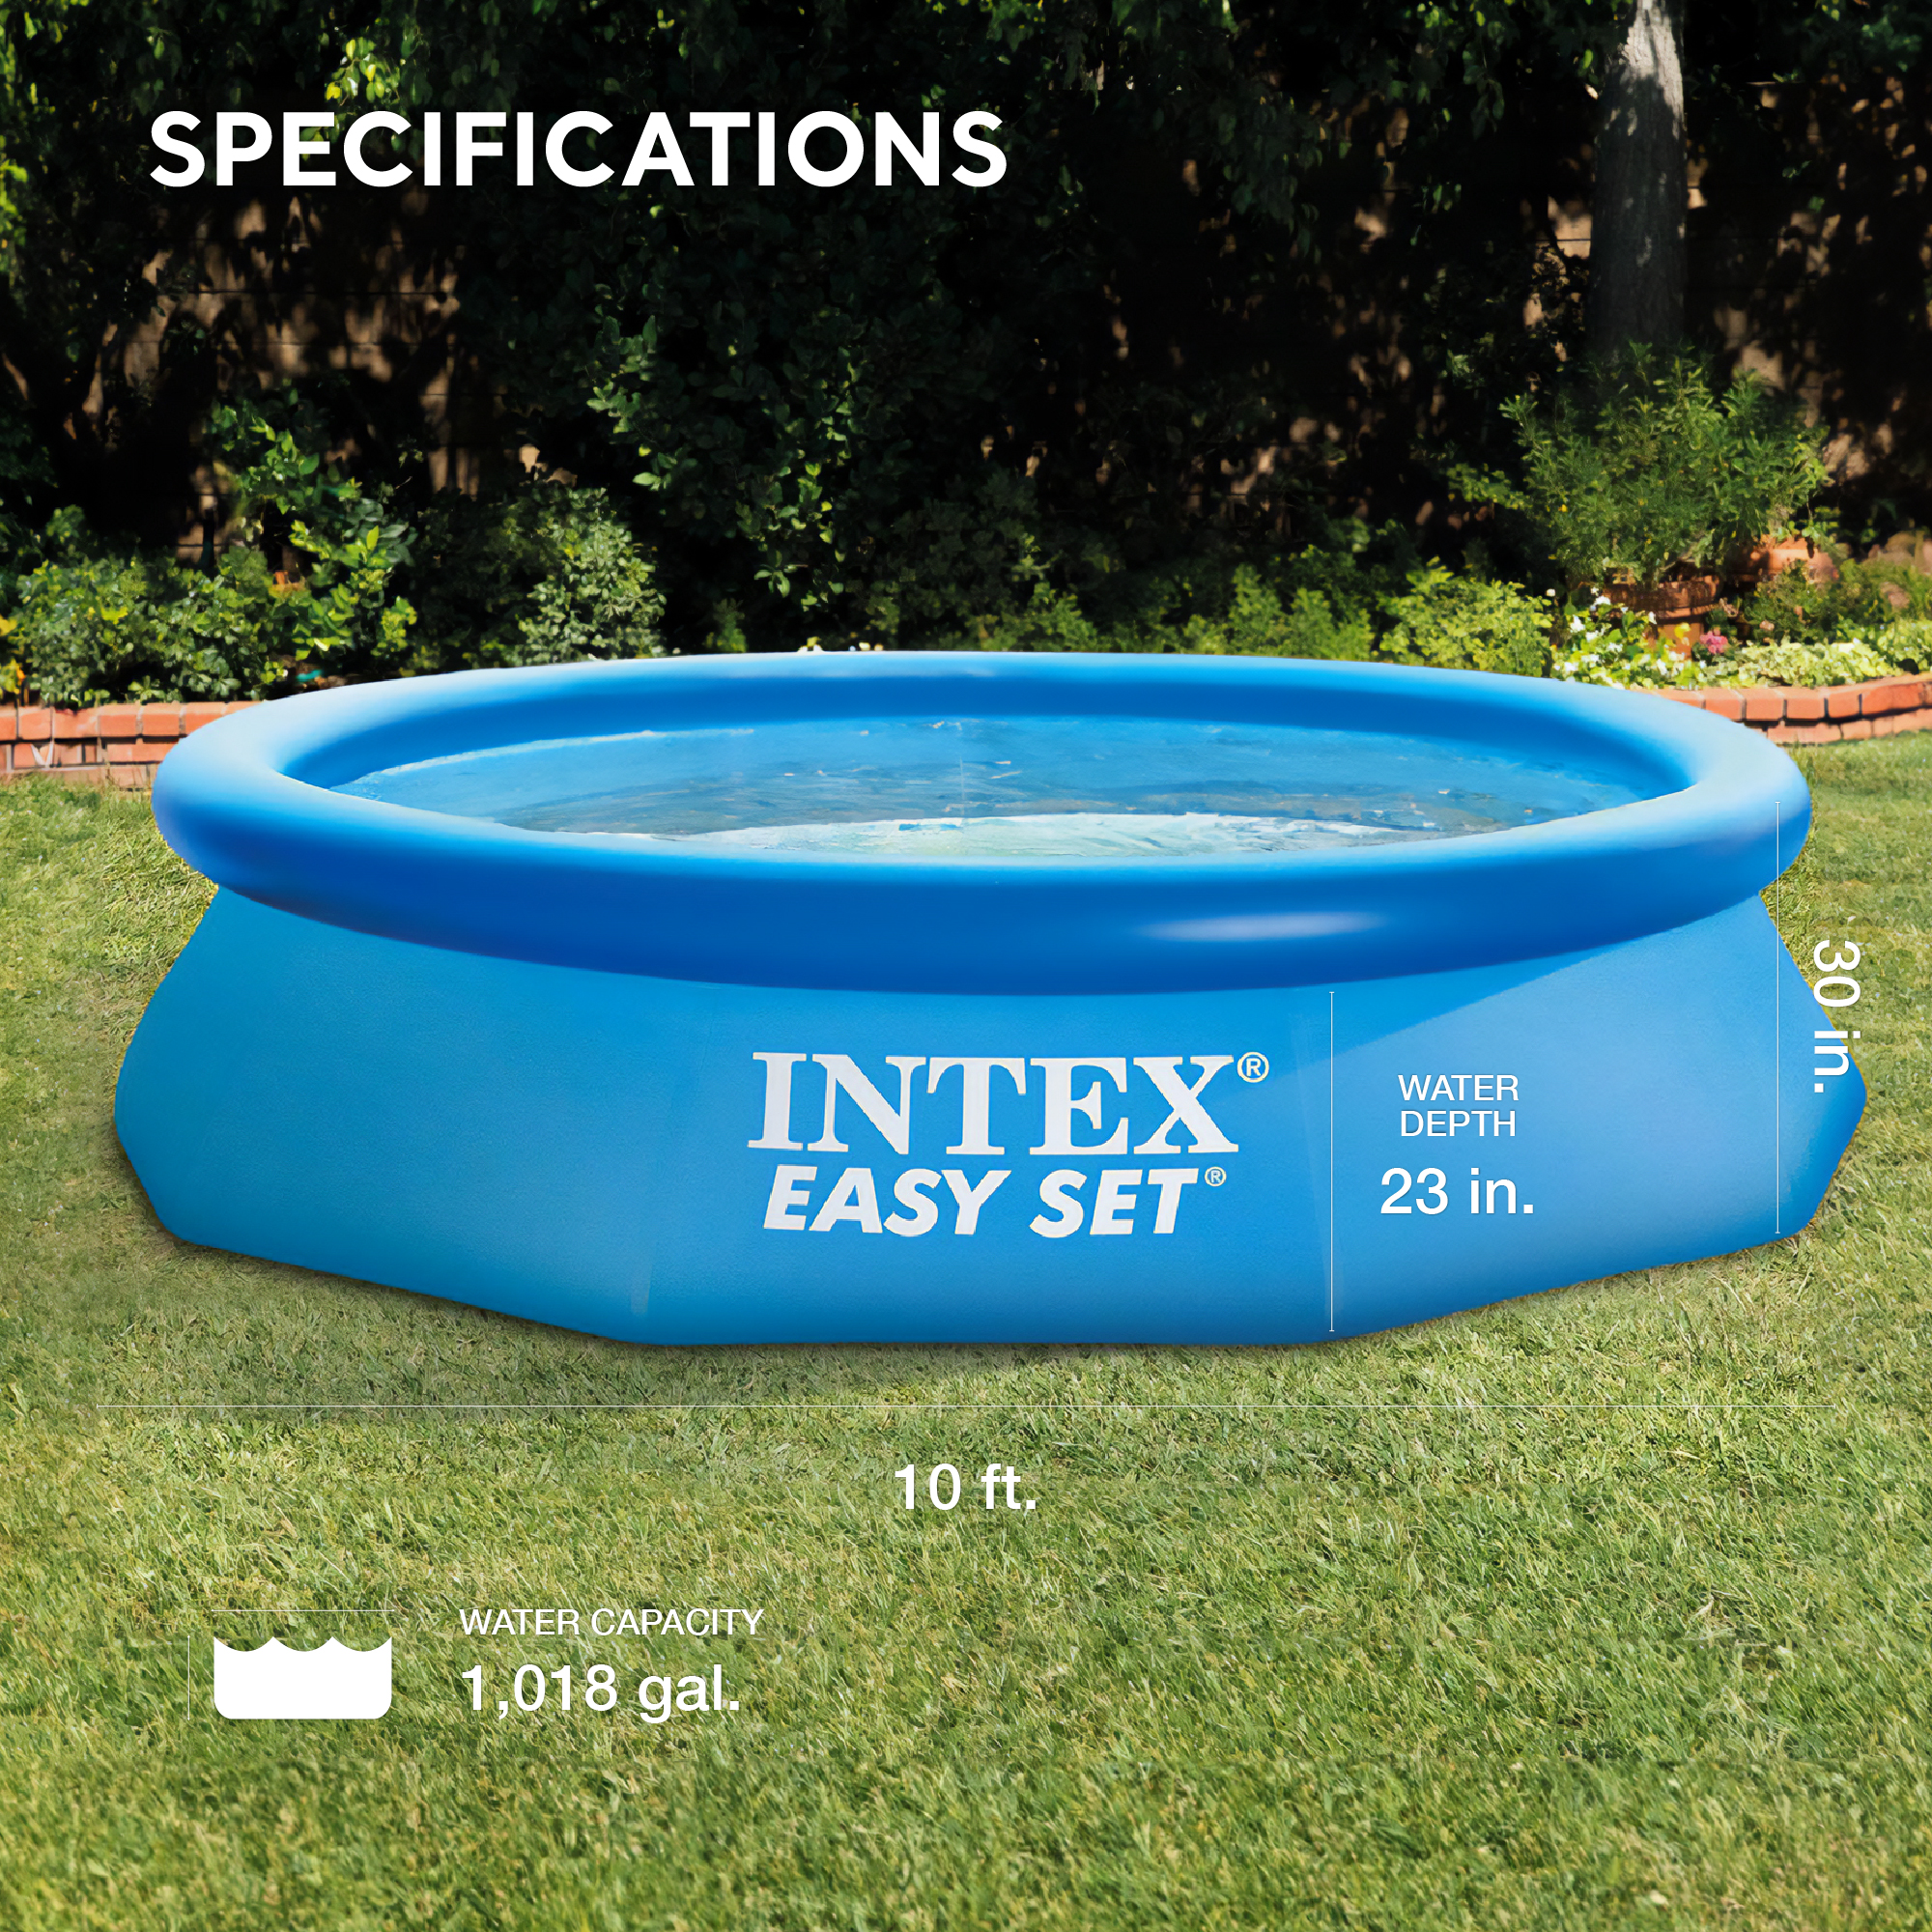 Intex Easy Set 10 Ft x 30 In Above Ground Inflatable Round Swimming Pool - image 2 of 9